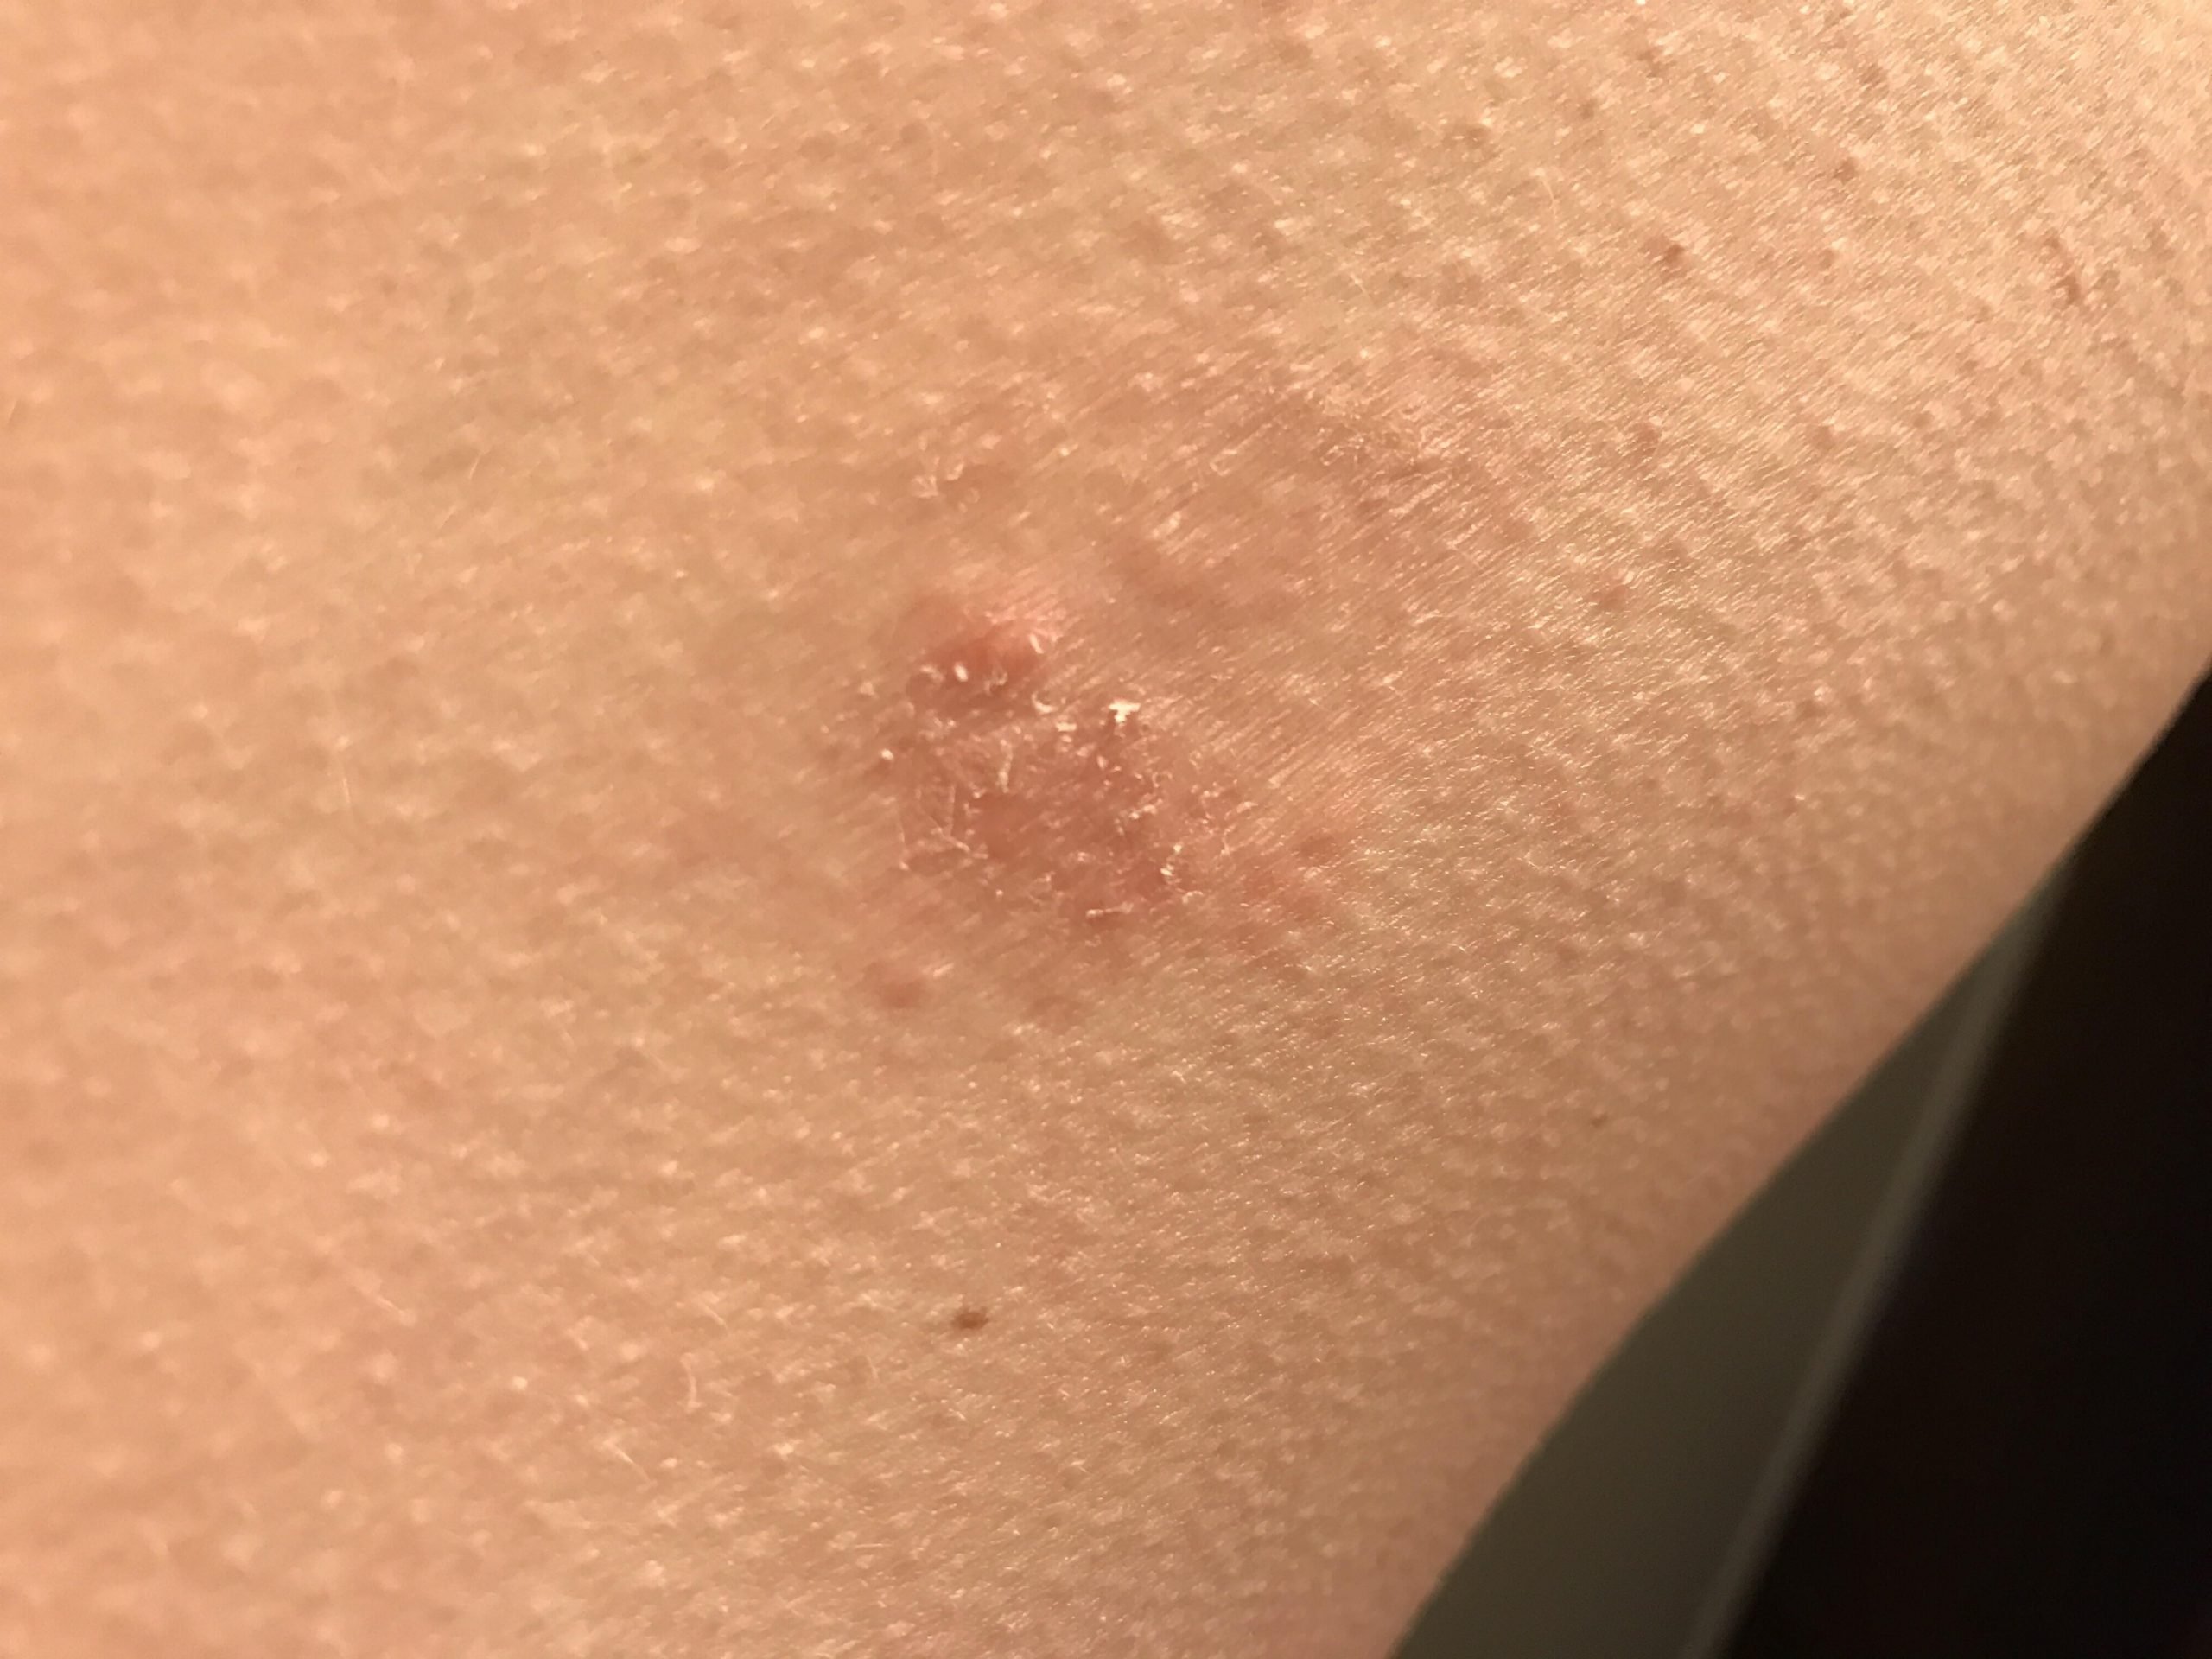 Hey guys! This dry and itchy patch of skin has been sticking around for ...